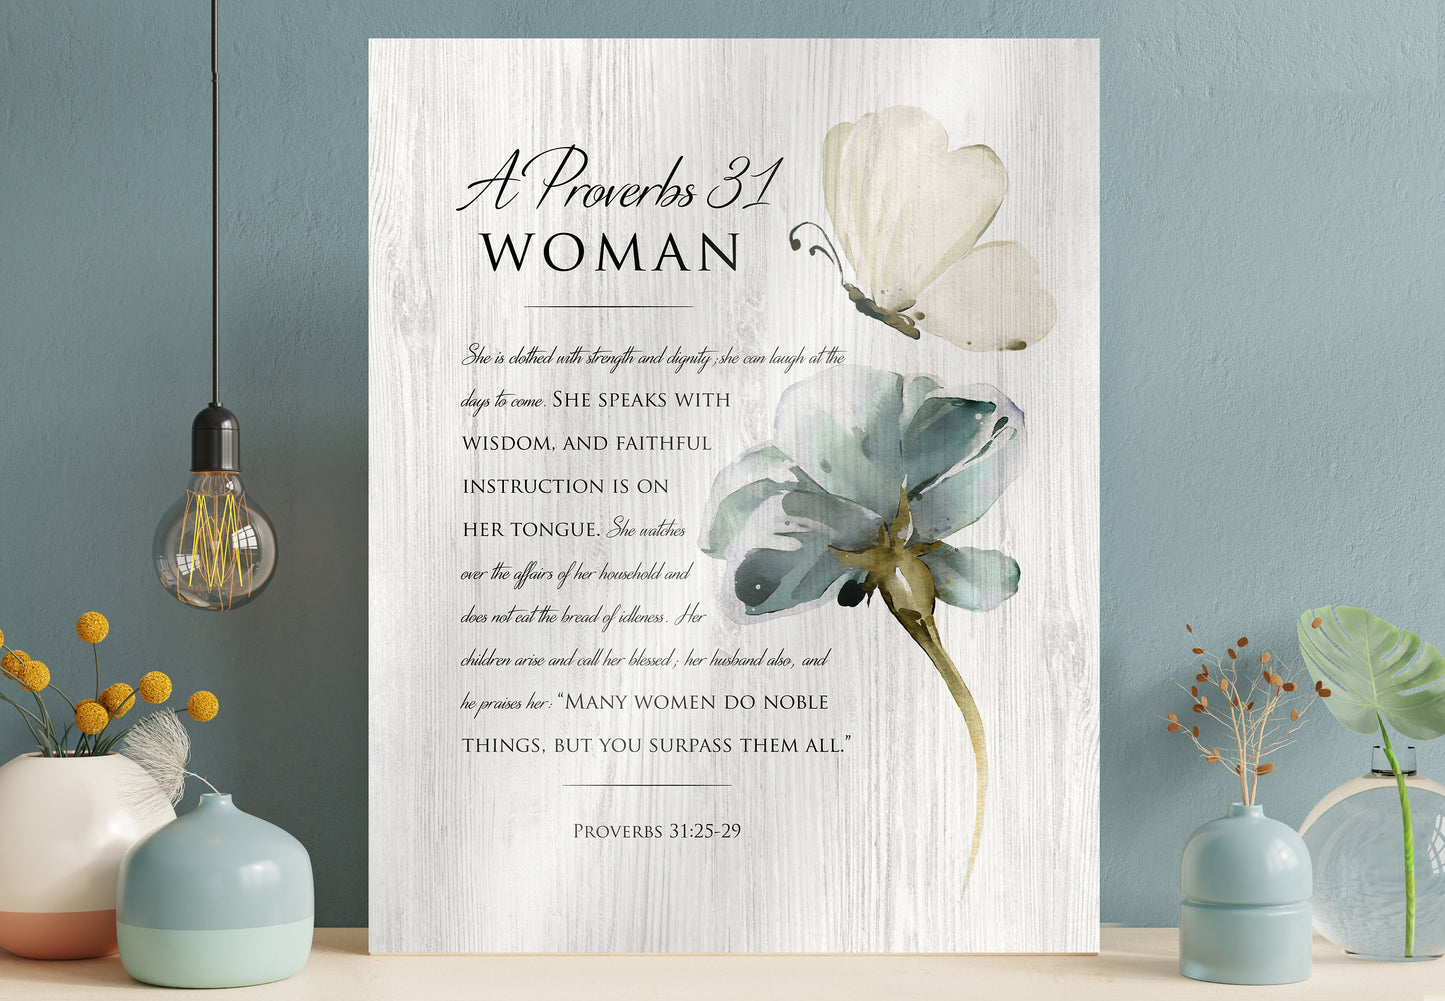 A Proverbs 31 Woman Country Farmhouse Sign, Inspirational Religious wall decor, Gift for her, 5 year anniversary Gift, Christian wall Decor